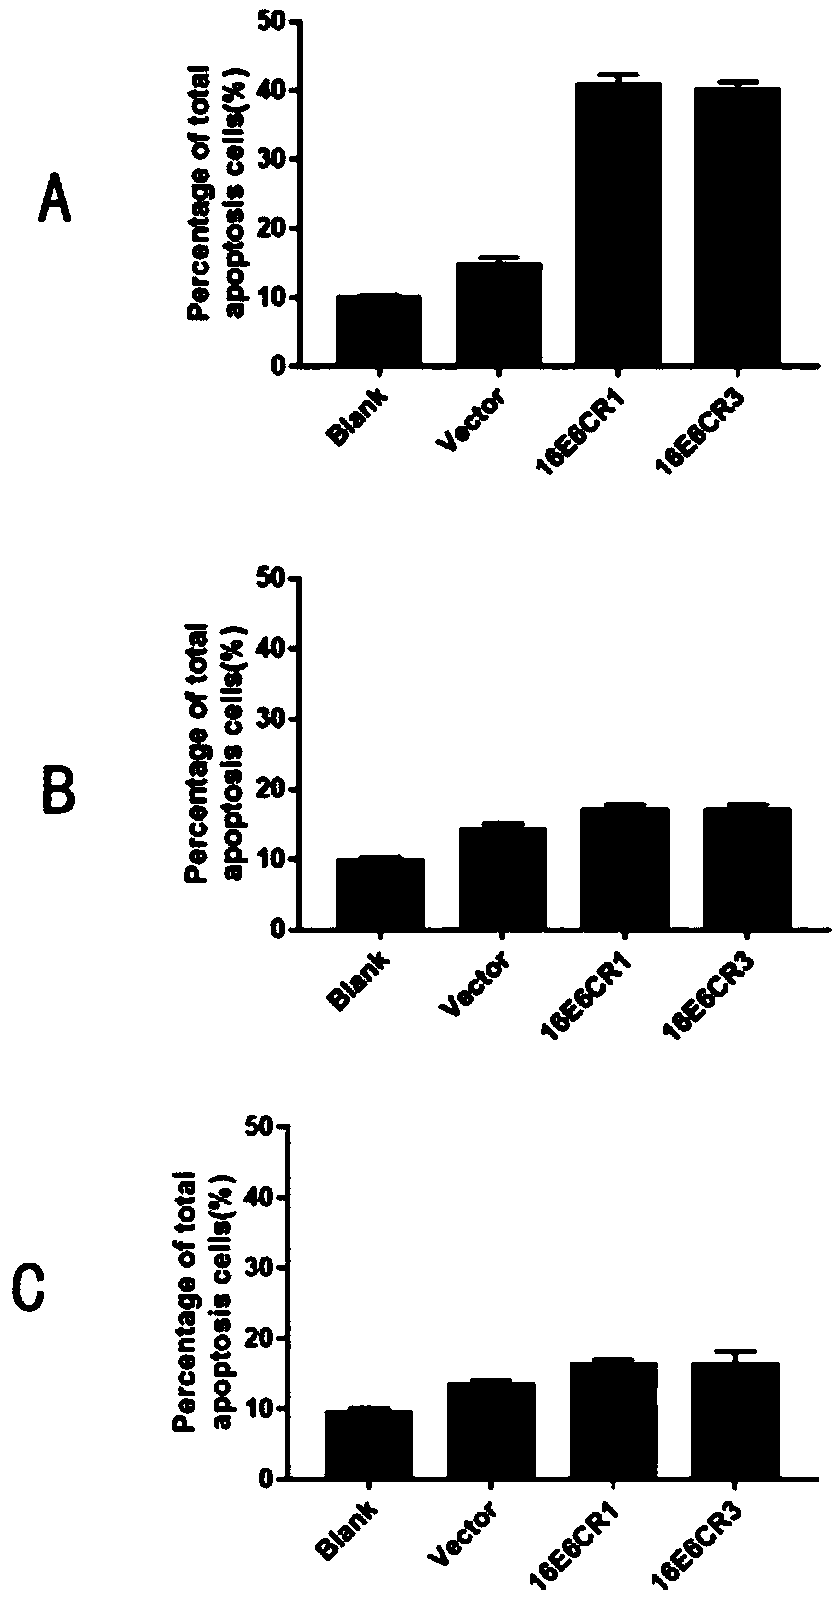 Medicine for treating HPV (human papillomavirus) infection and application thereof